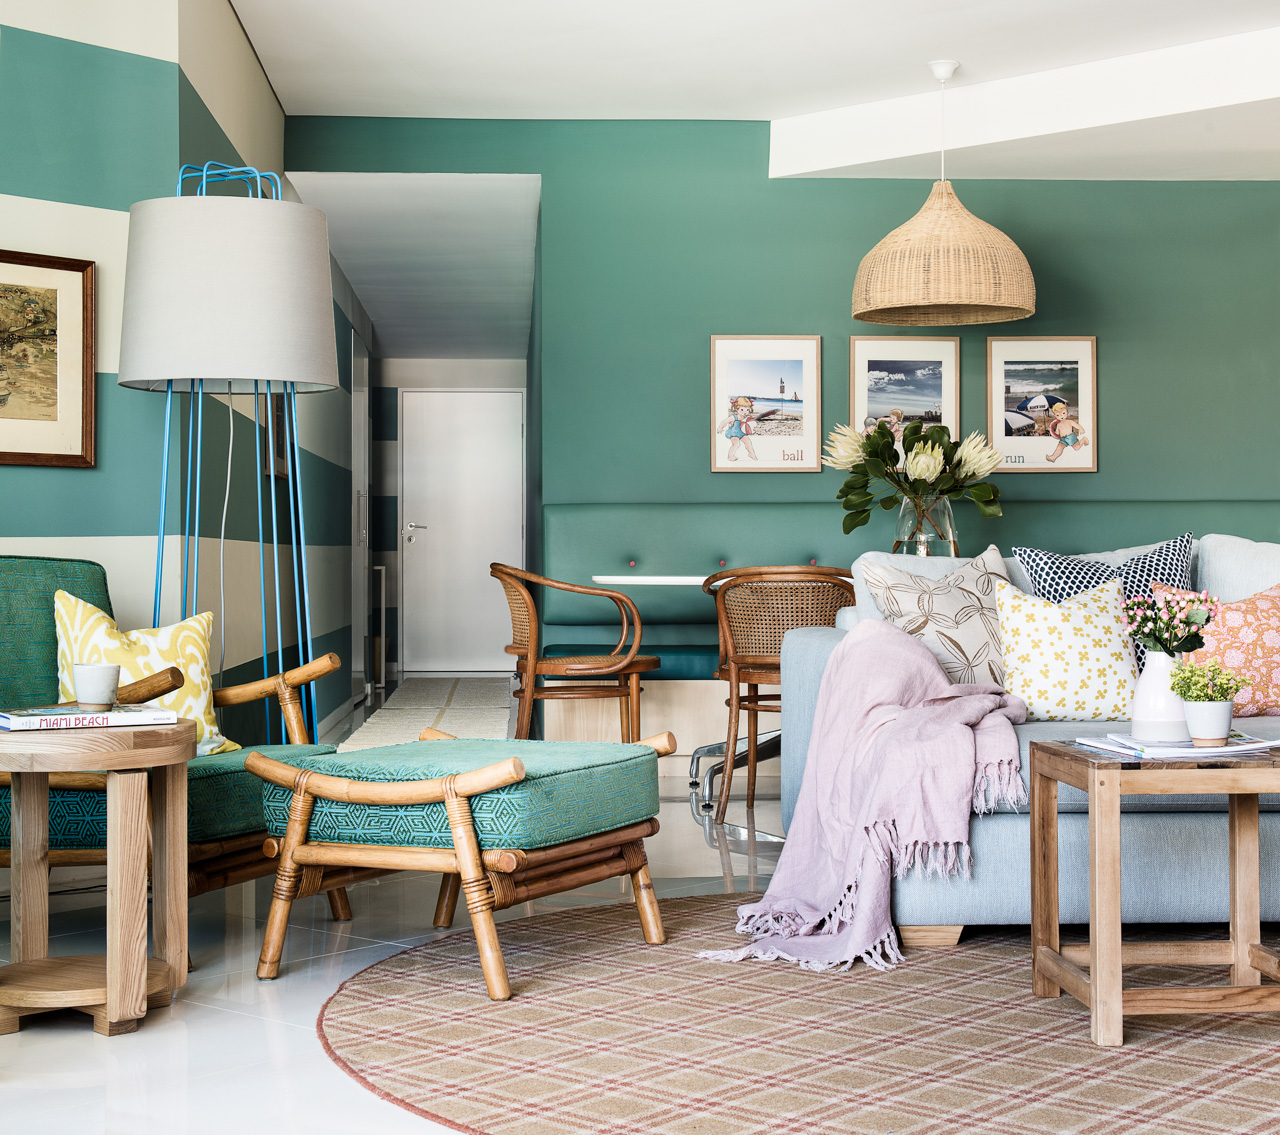 Dulux Colour Awards showcases stunning residential interiors - The